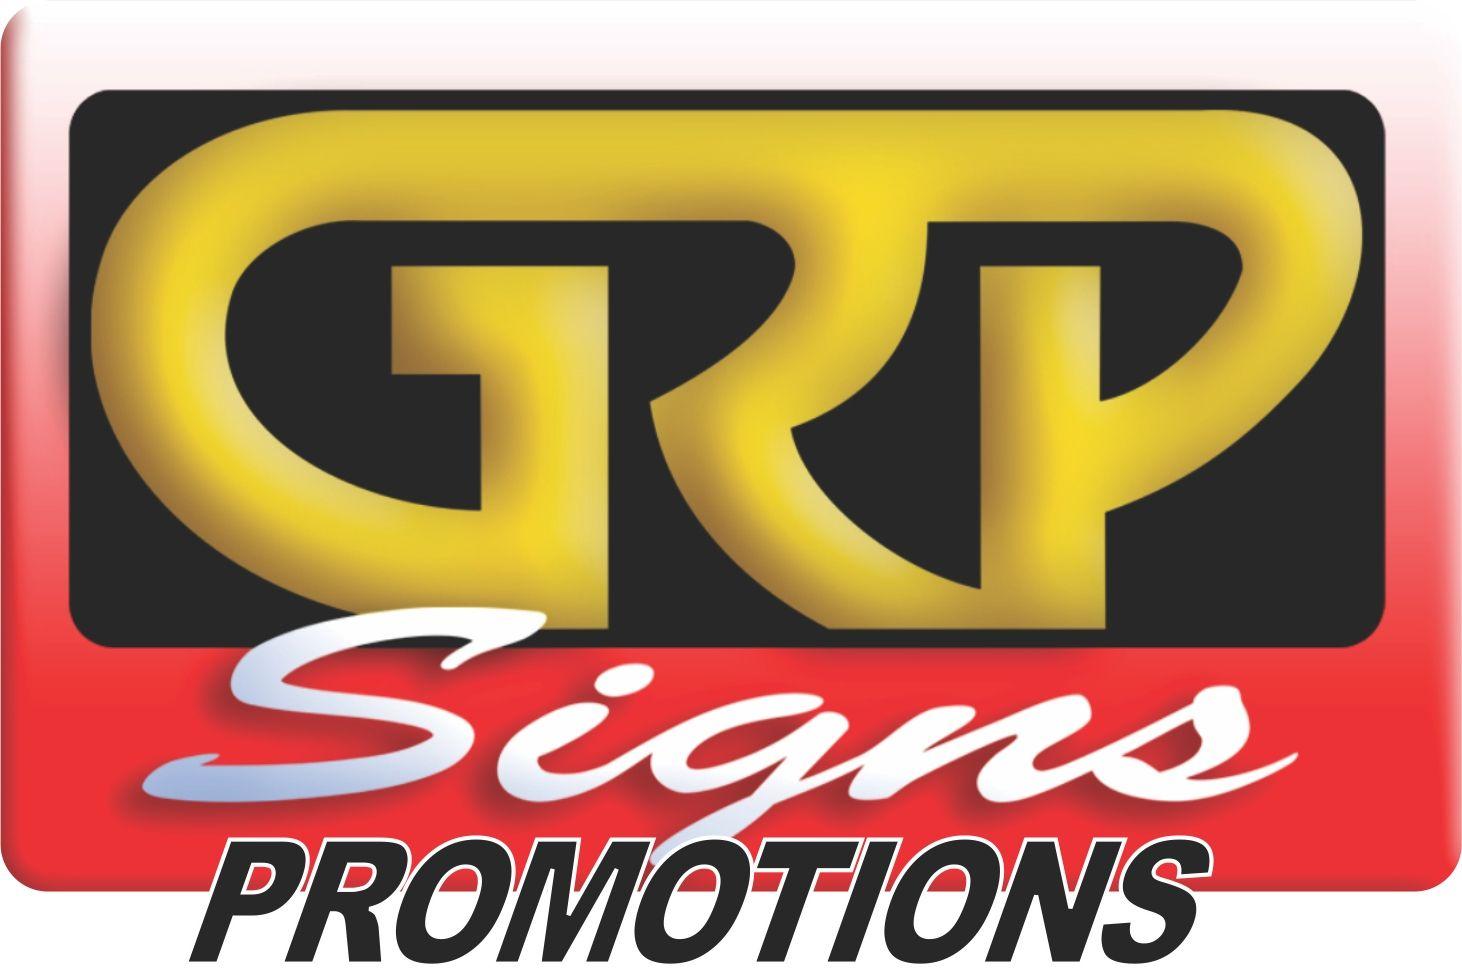 GRP Logo - Product Results Signs Promotions, Newark, NJ